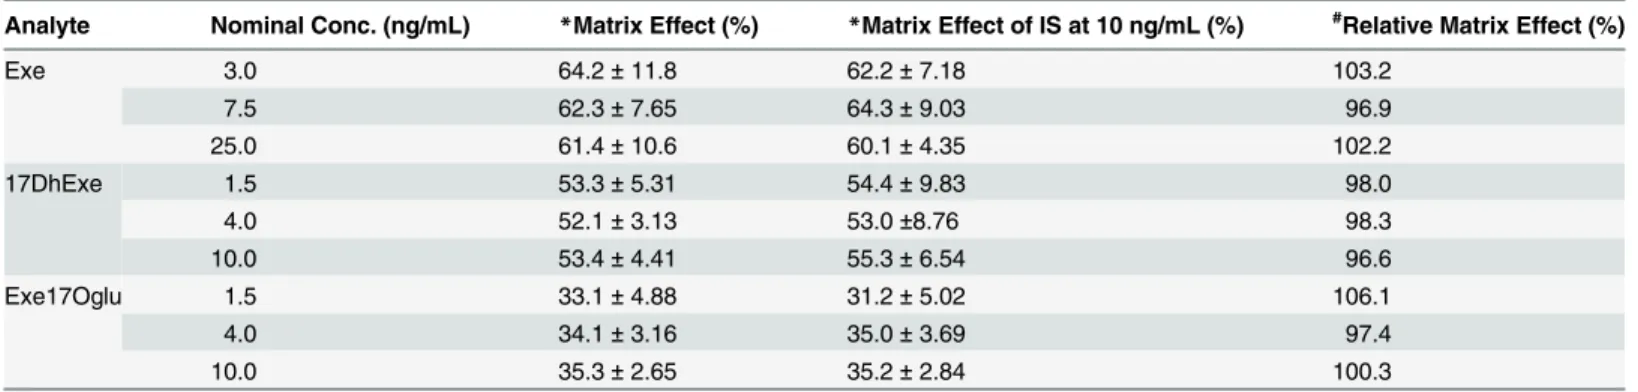 Table 2. Matrix Effect of QC Samples for Exe, 17DhExe and Exe17Oglu and their internal standards.